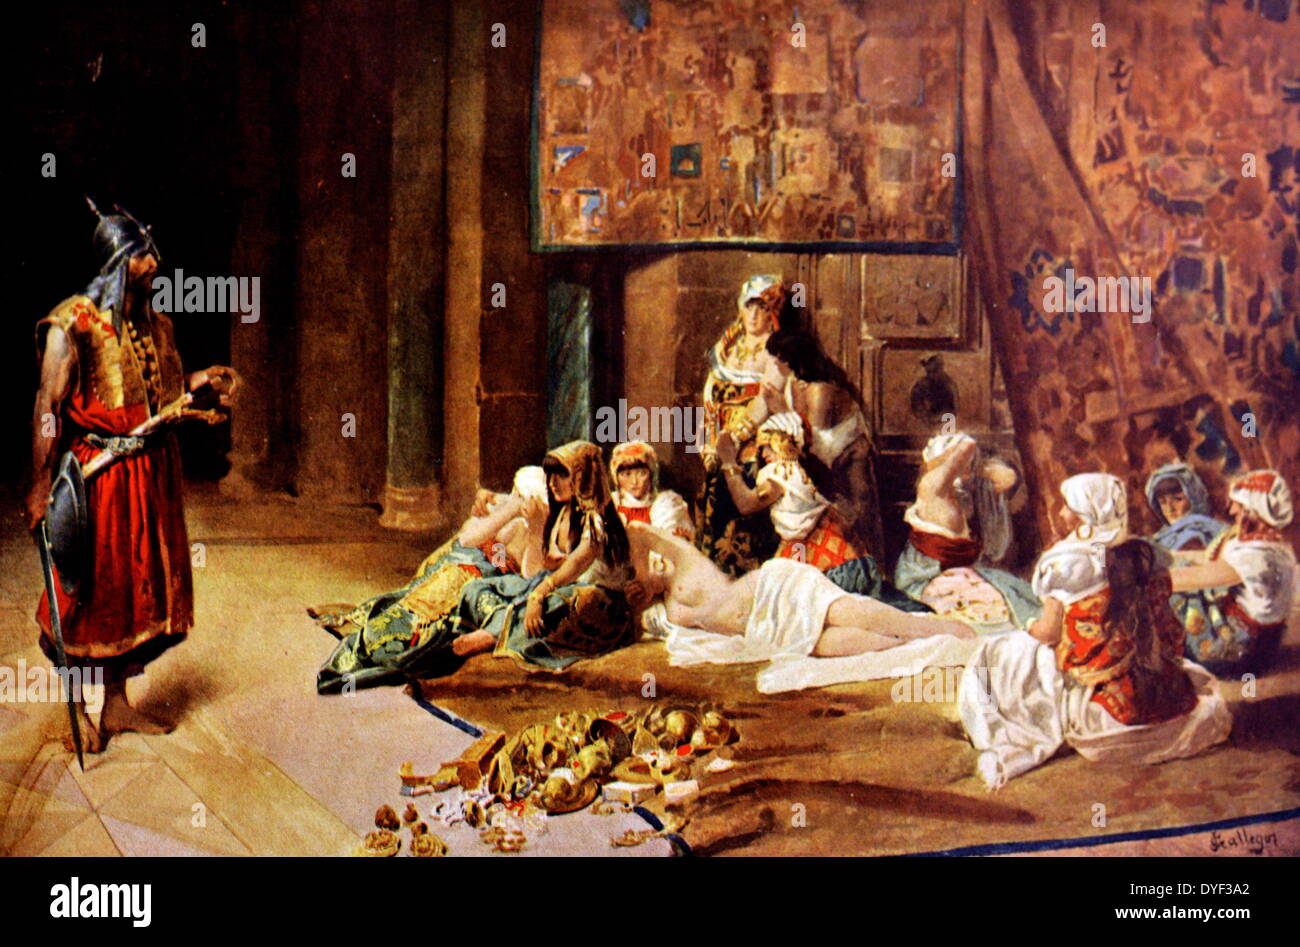 War Booty by M. Dominguez. Depicting the Arab custom that the spoils of war be distributed amongst the victorious soldiers as payment for putting their lives on the line. Not just gold and jewels, but also women were held captive and used in the Harems of Cordoba. Stock Photo